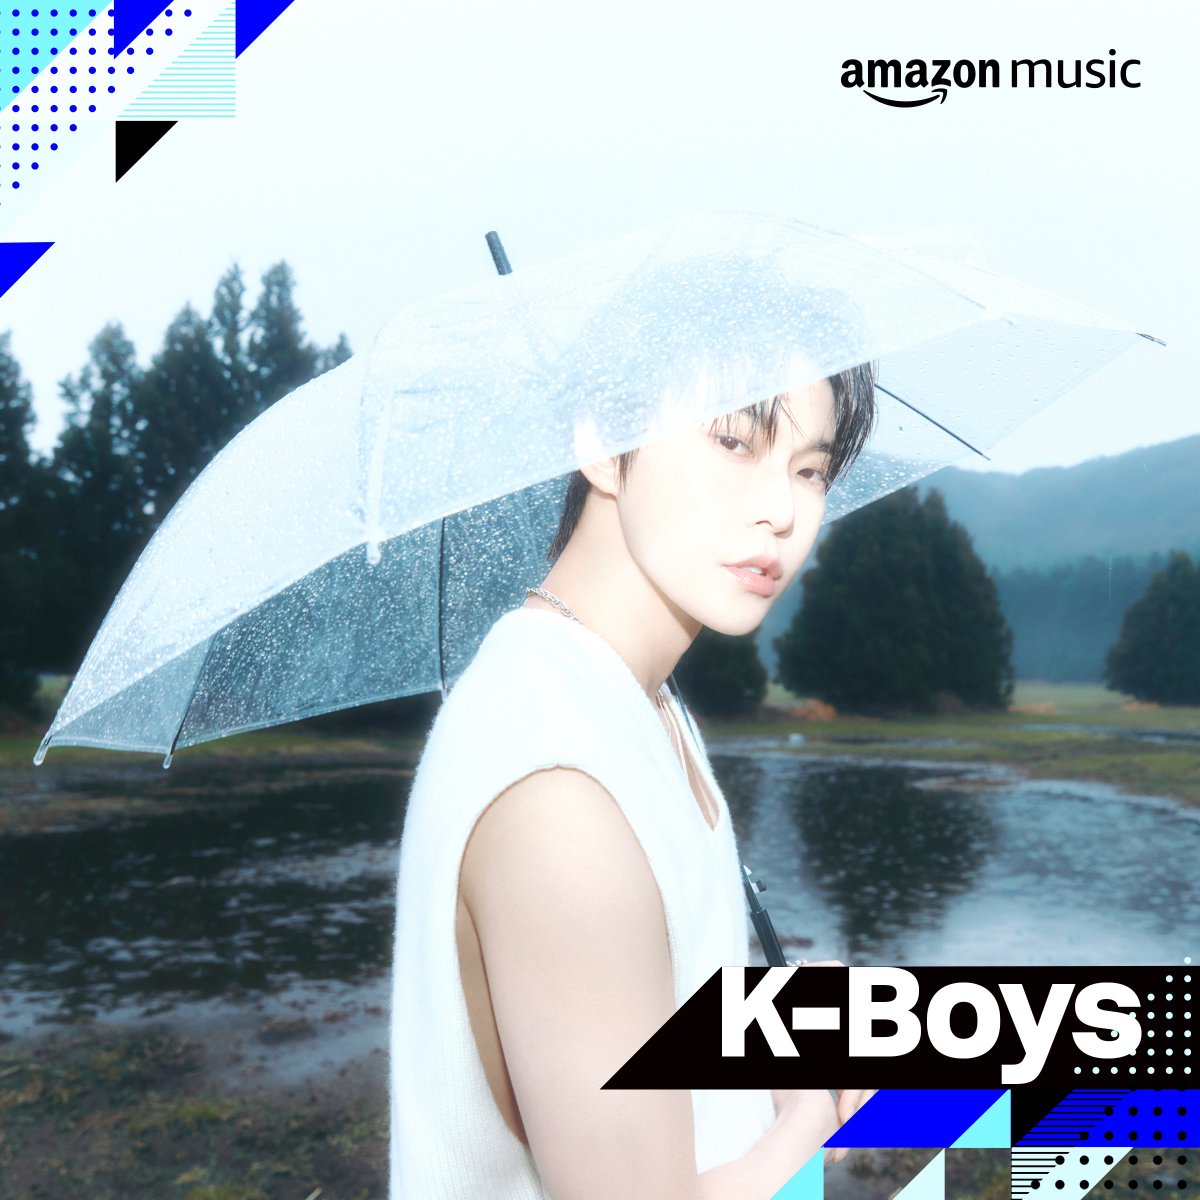 Check out DOYOUNG on the cover of @amazonmusic 's K-Boys playlist! Head over and listen to 'Little Light' right now! 🎧amzn.to/4bT7o9u 🌿amzn.to/3QdEAiO @amazonmusicjp #DOYOUNG #도영 #청춘의포말 #DOYOUNG_청춘의포말 #DOYOUNG_청춘의포말_YOUTH #NCT #NCT127